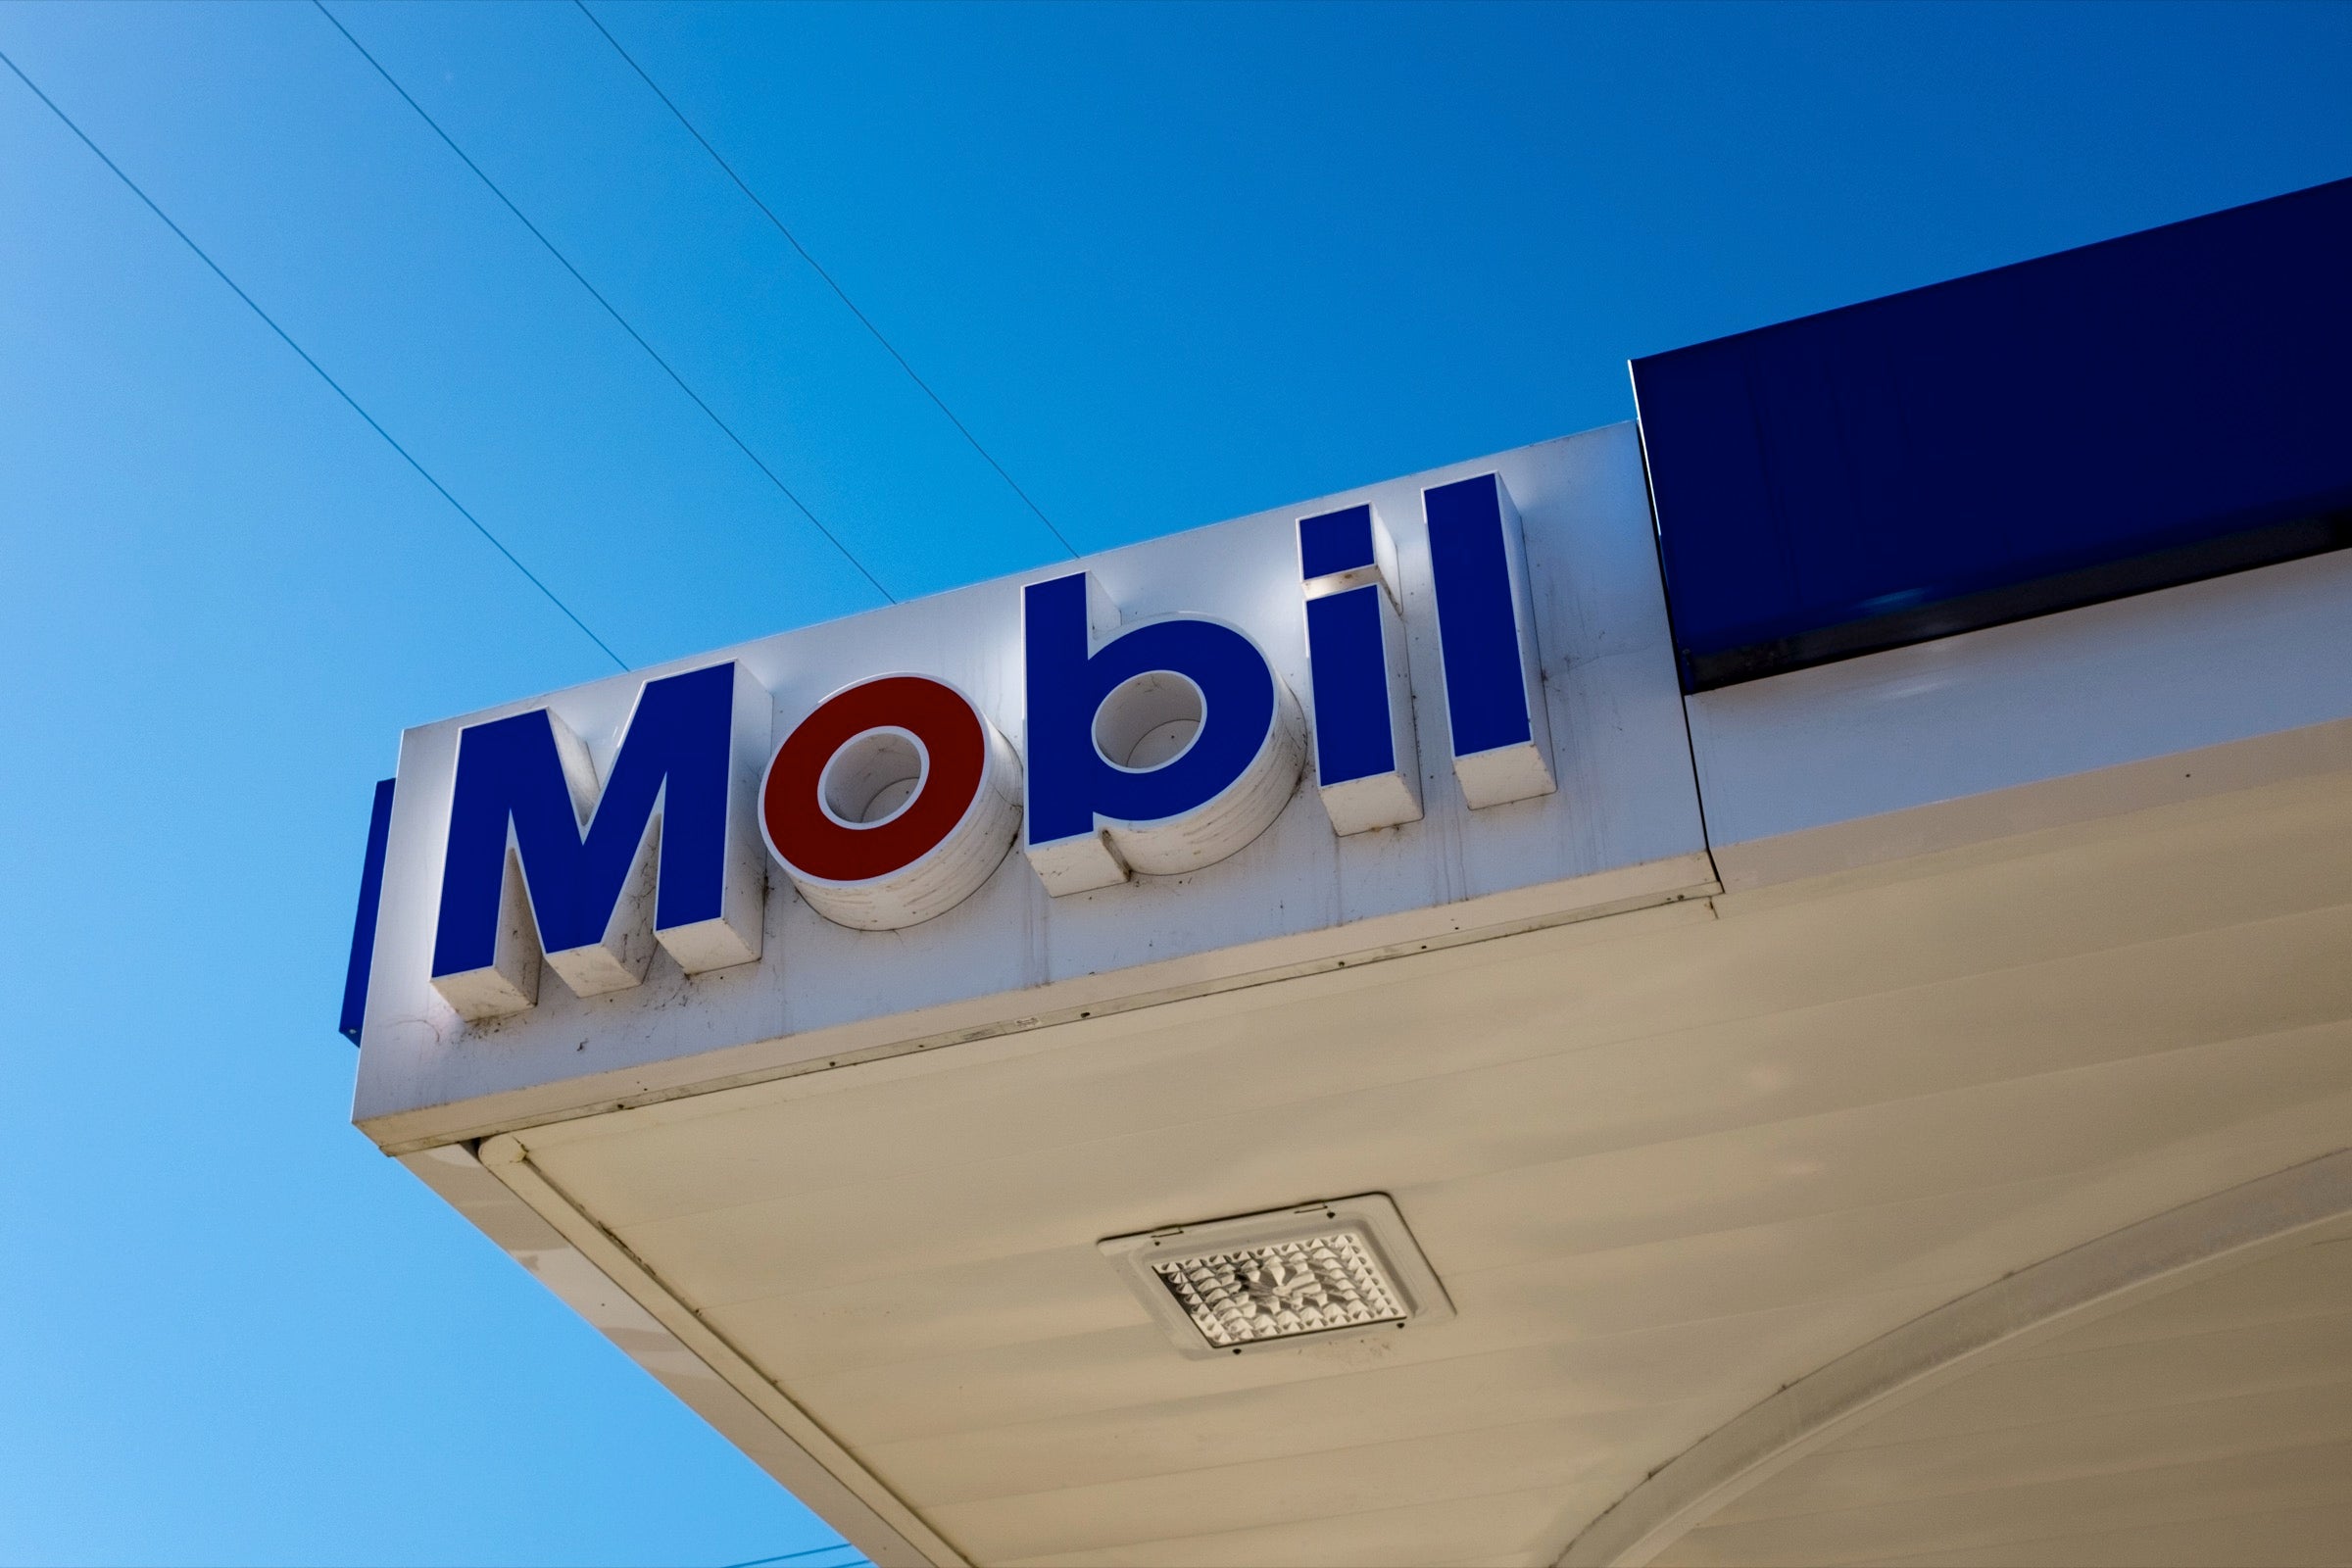 Mobil gas station sign